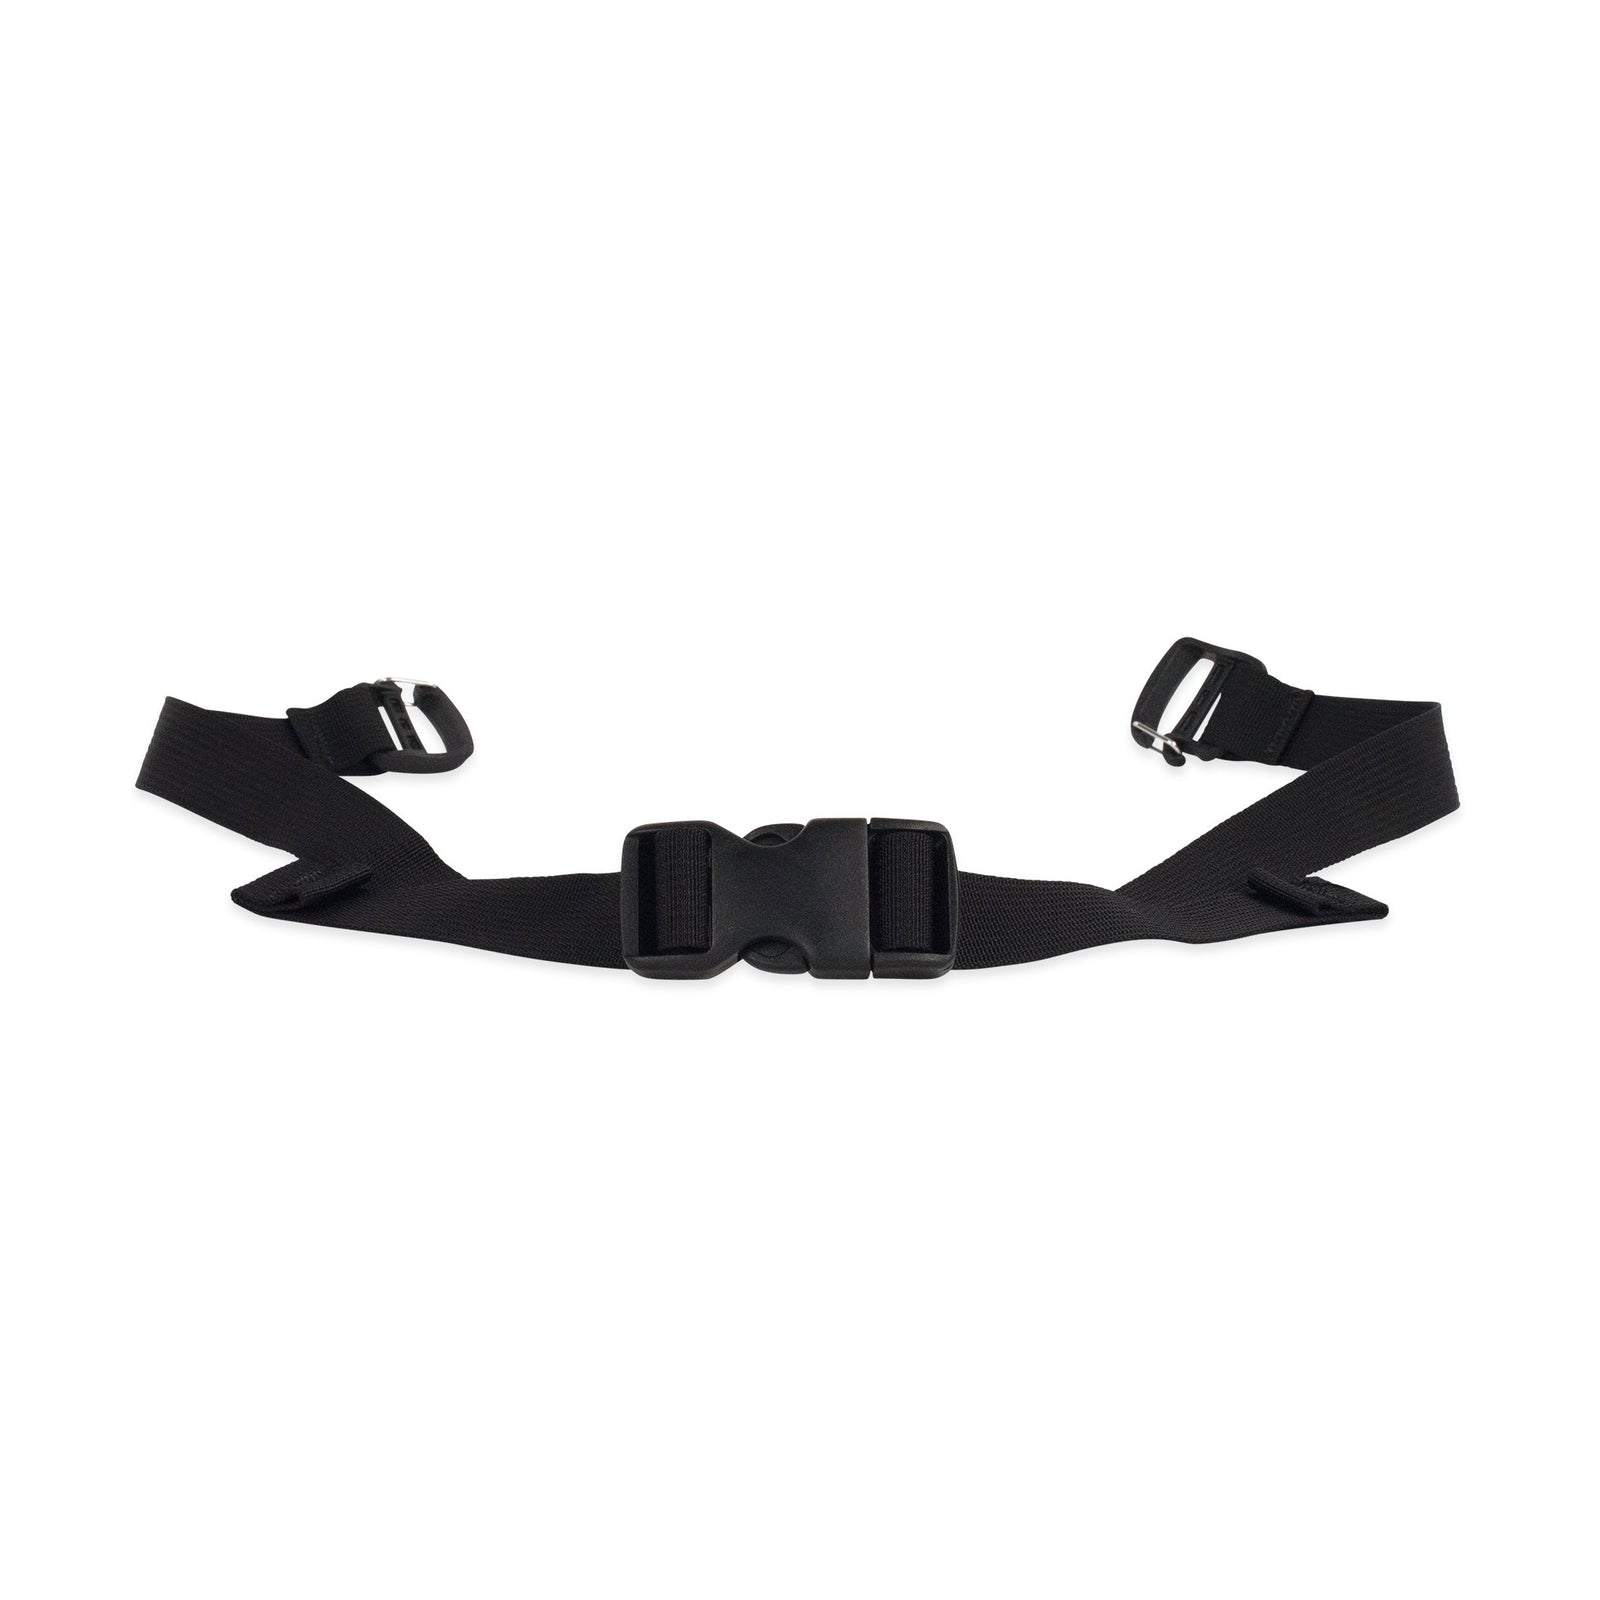 Product shot of Topo Designs Waist Strap in "Black" for backpacks.